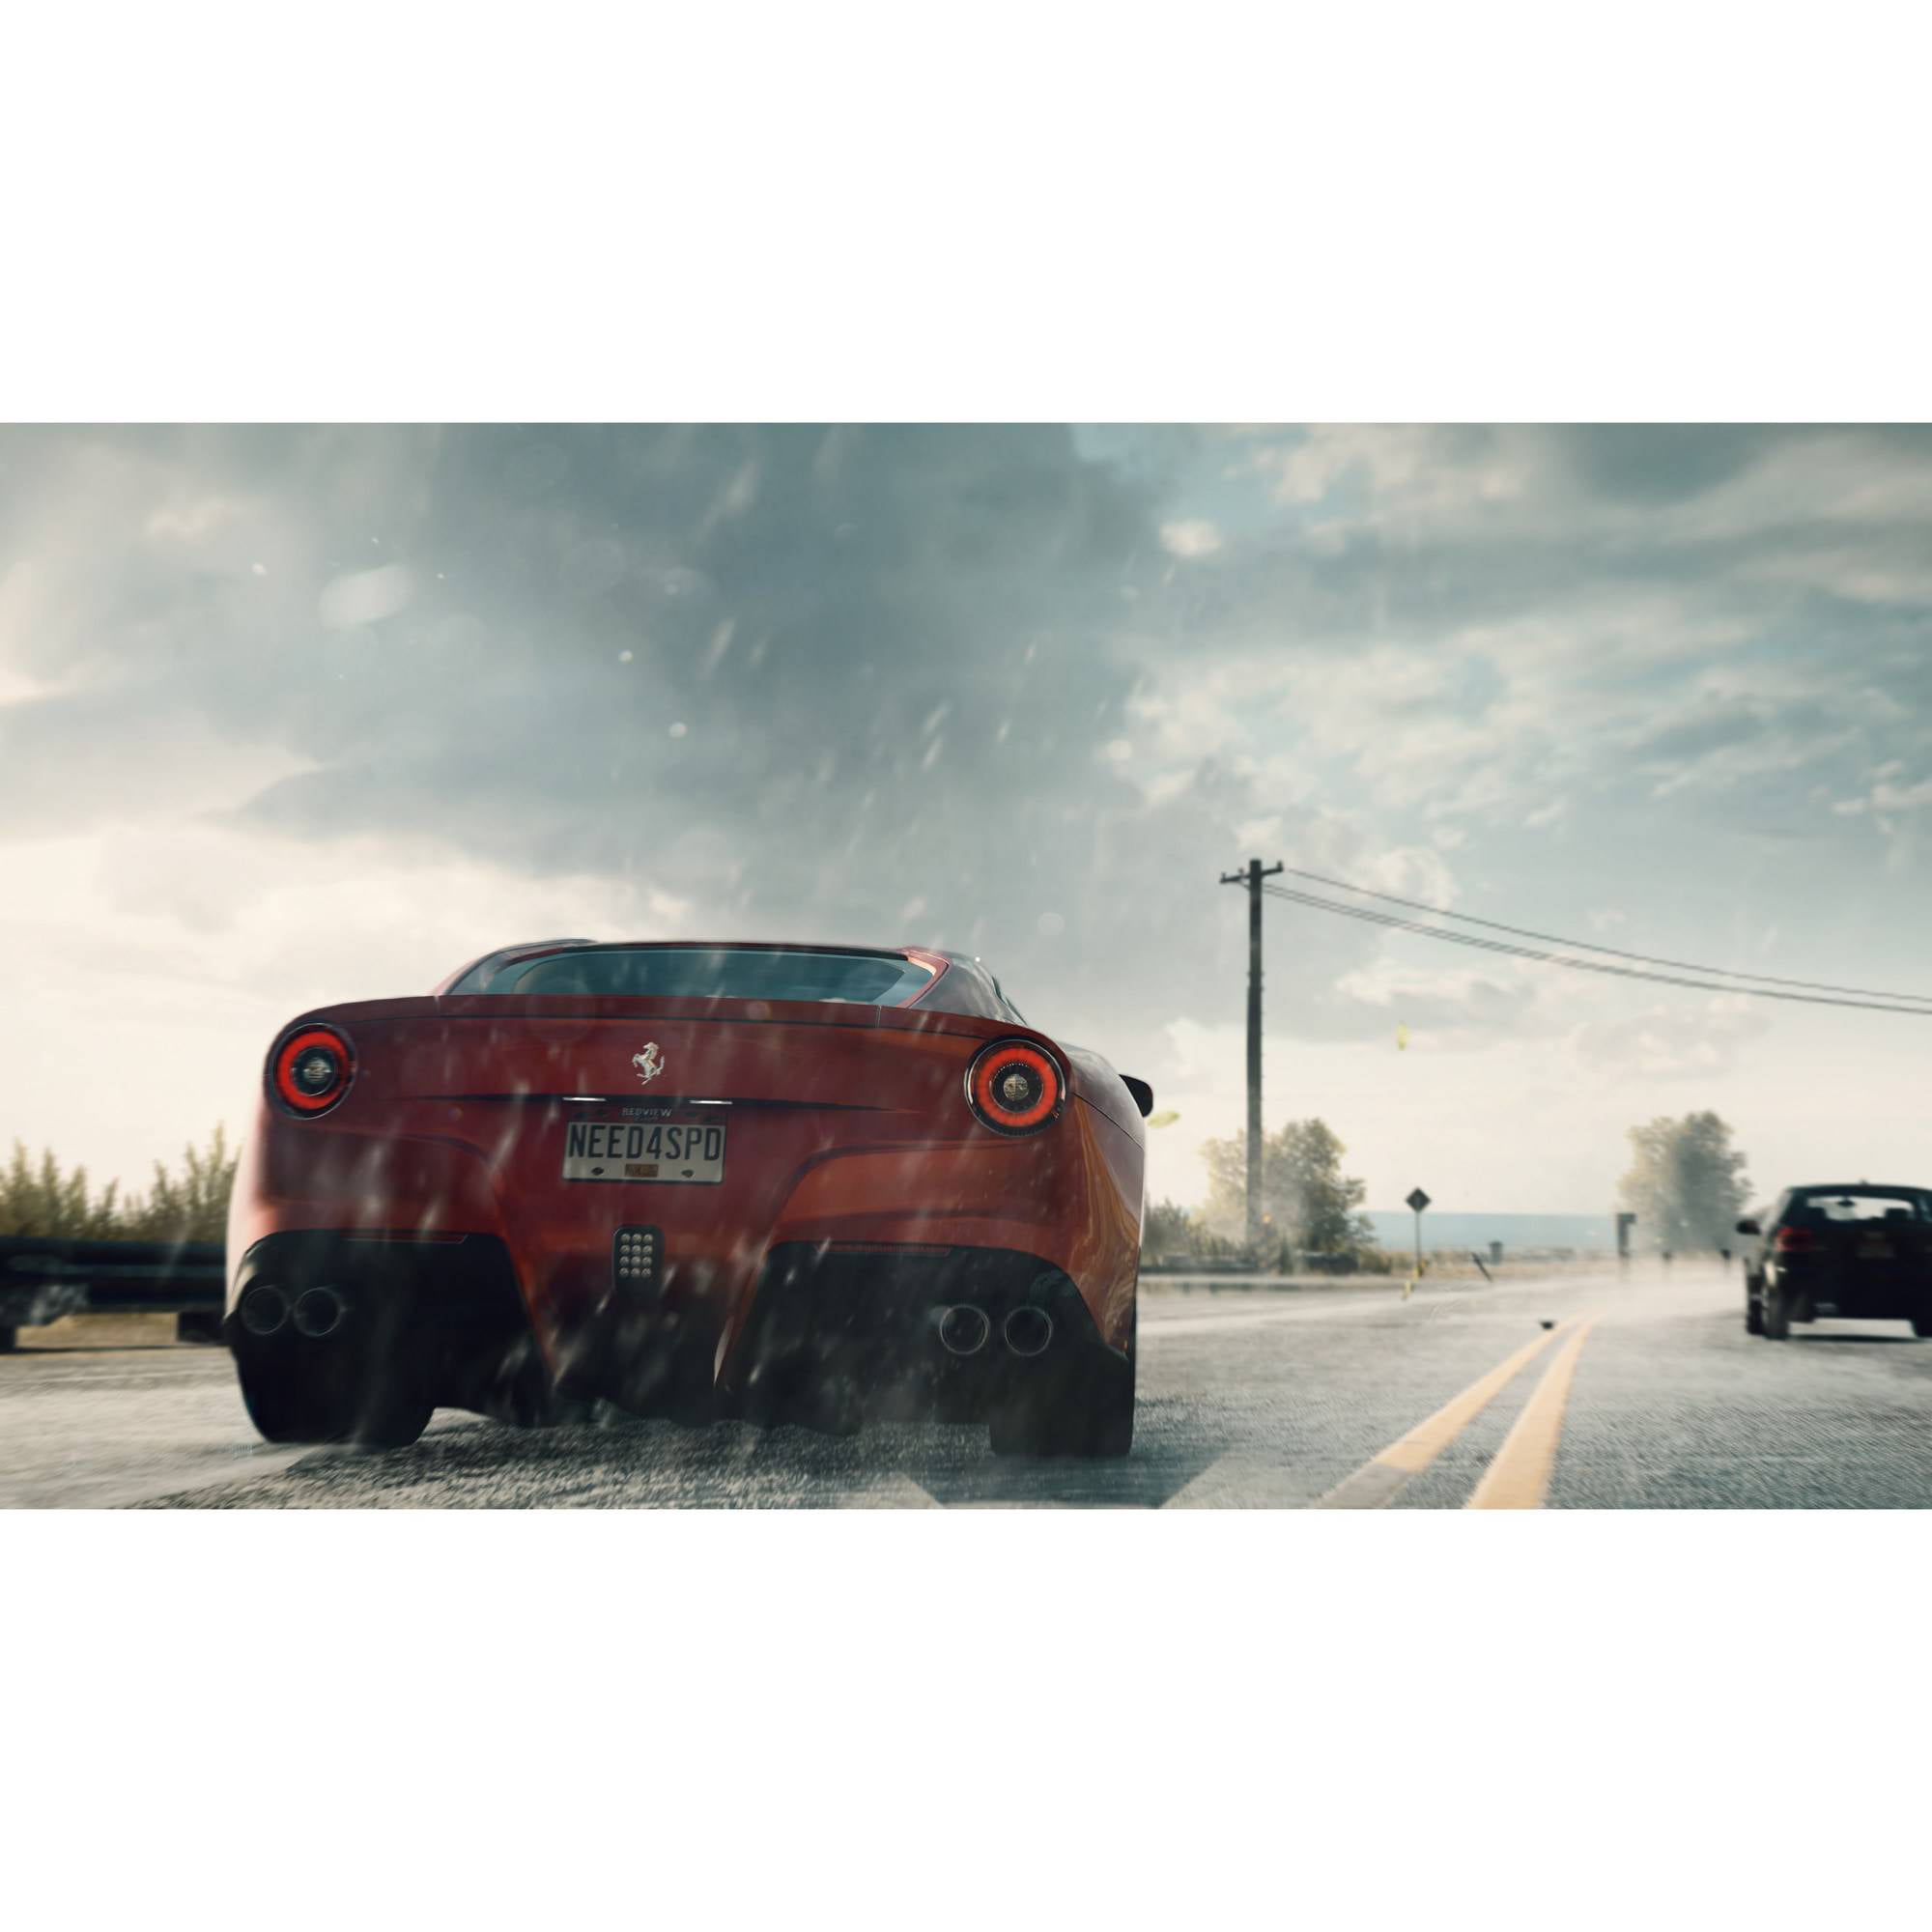 Need for Speed: Rivals Standard Edition Xbox One 73035 - Best Buy